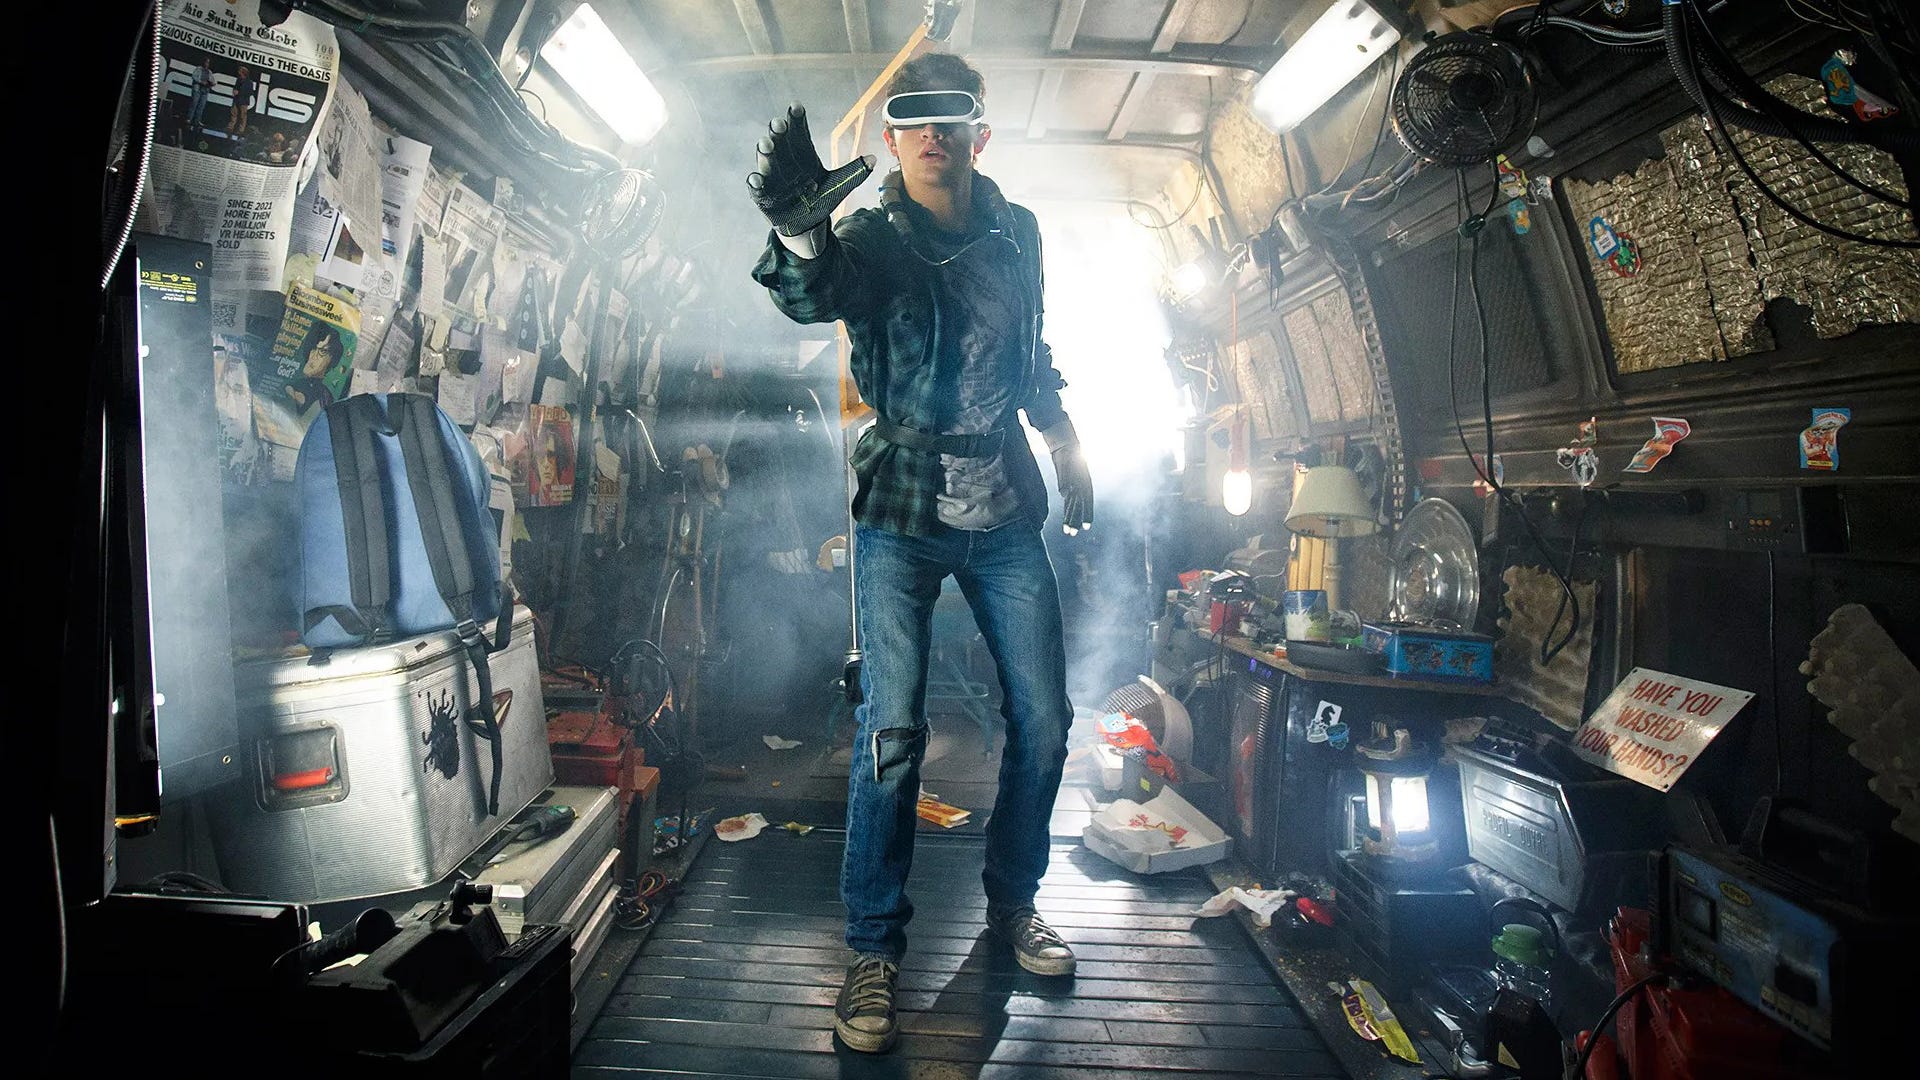 Love it or hate it, a film sequel to Spielberg's Ready Player One is coming - bring on the pop culture bingo!